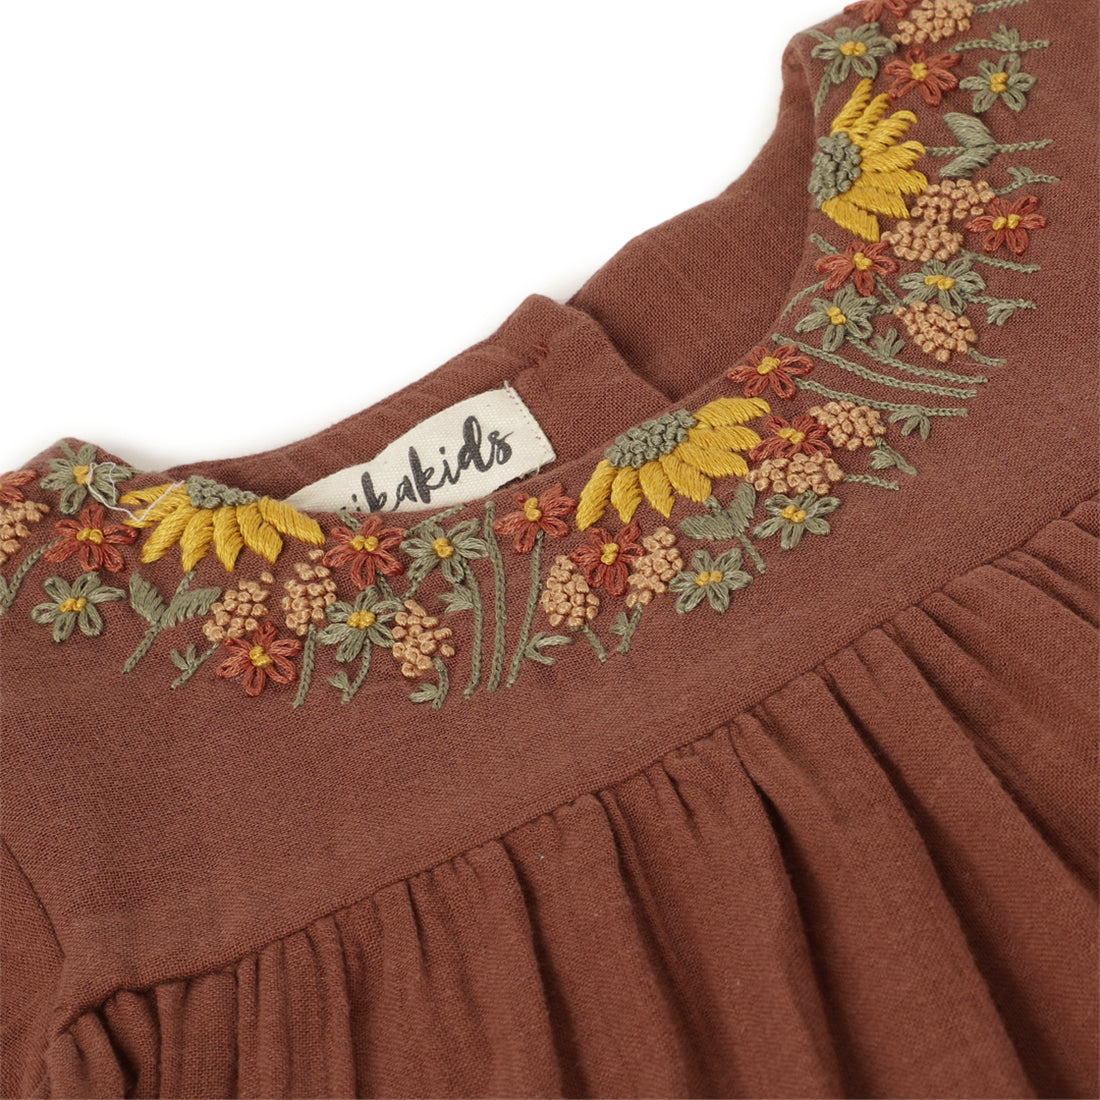 Girls Embroidered Cotton Dress Rust Brown - 1 yr to 8 yrs - Close-up